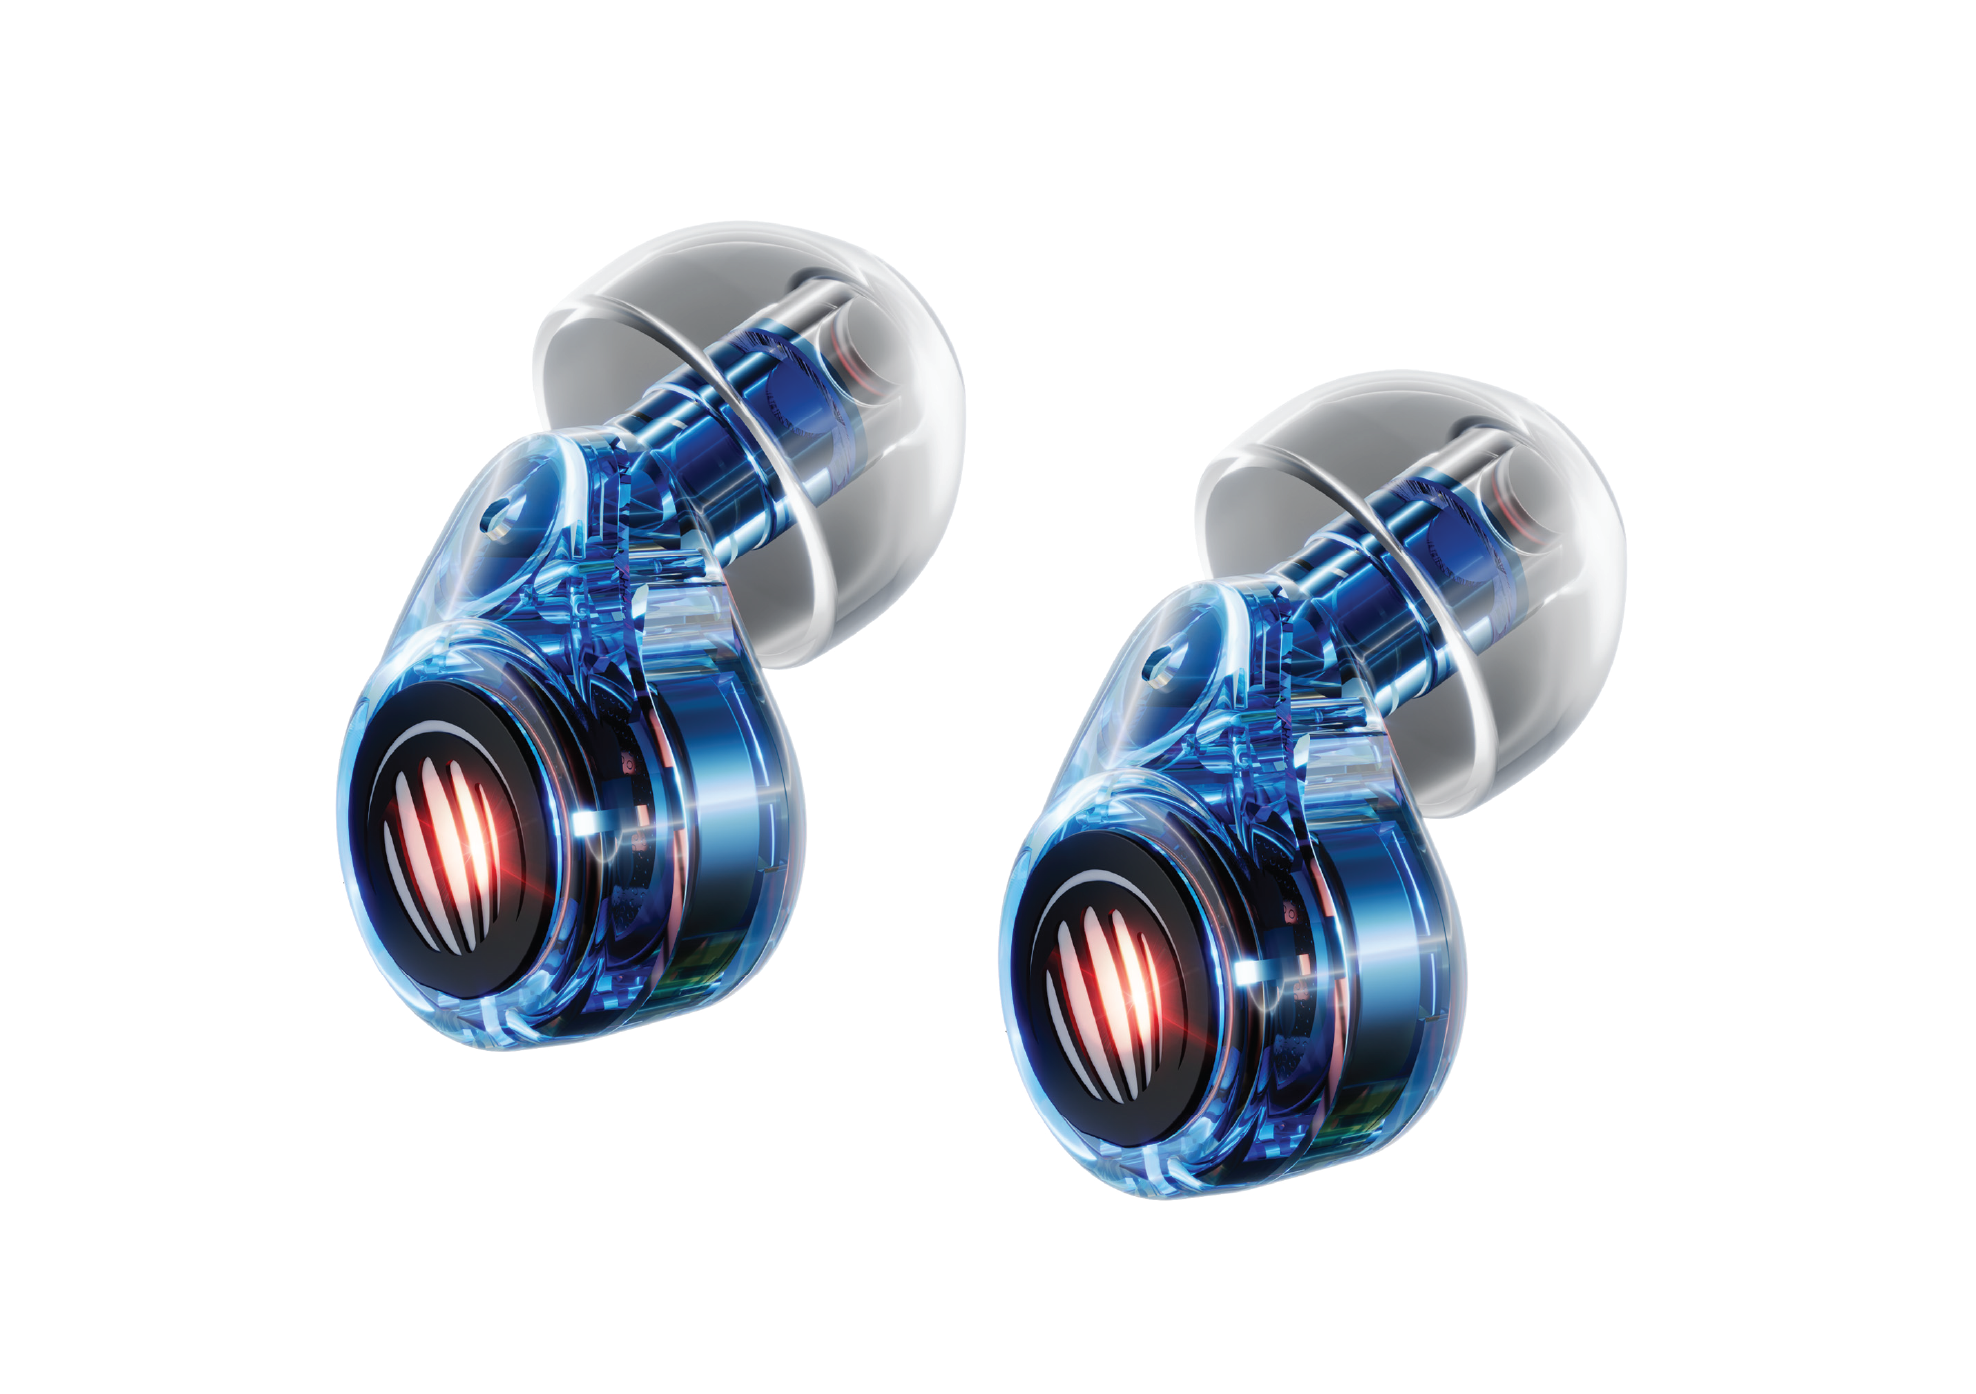 Add a 2nd Set of Earlights at 10% Off!